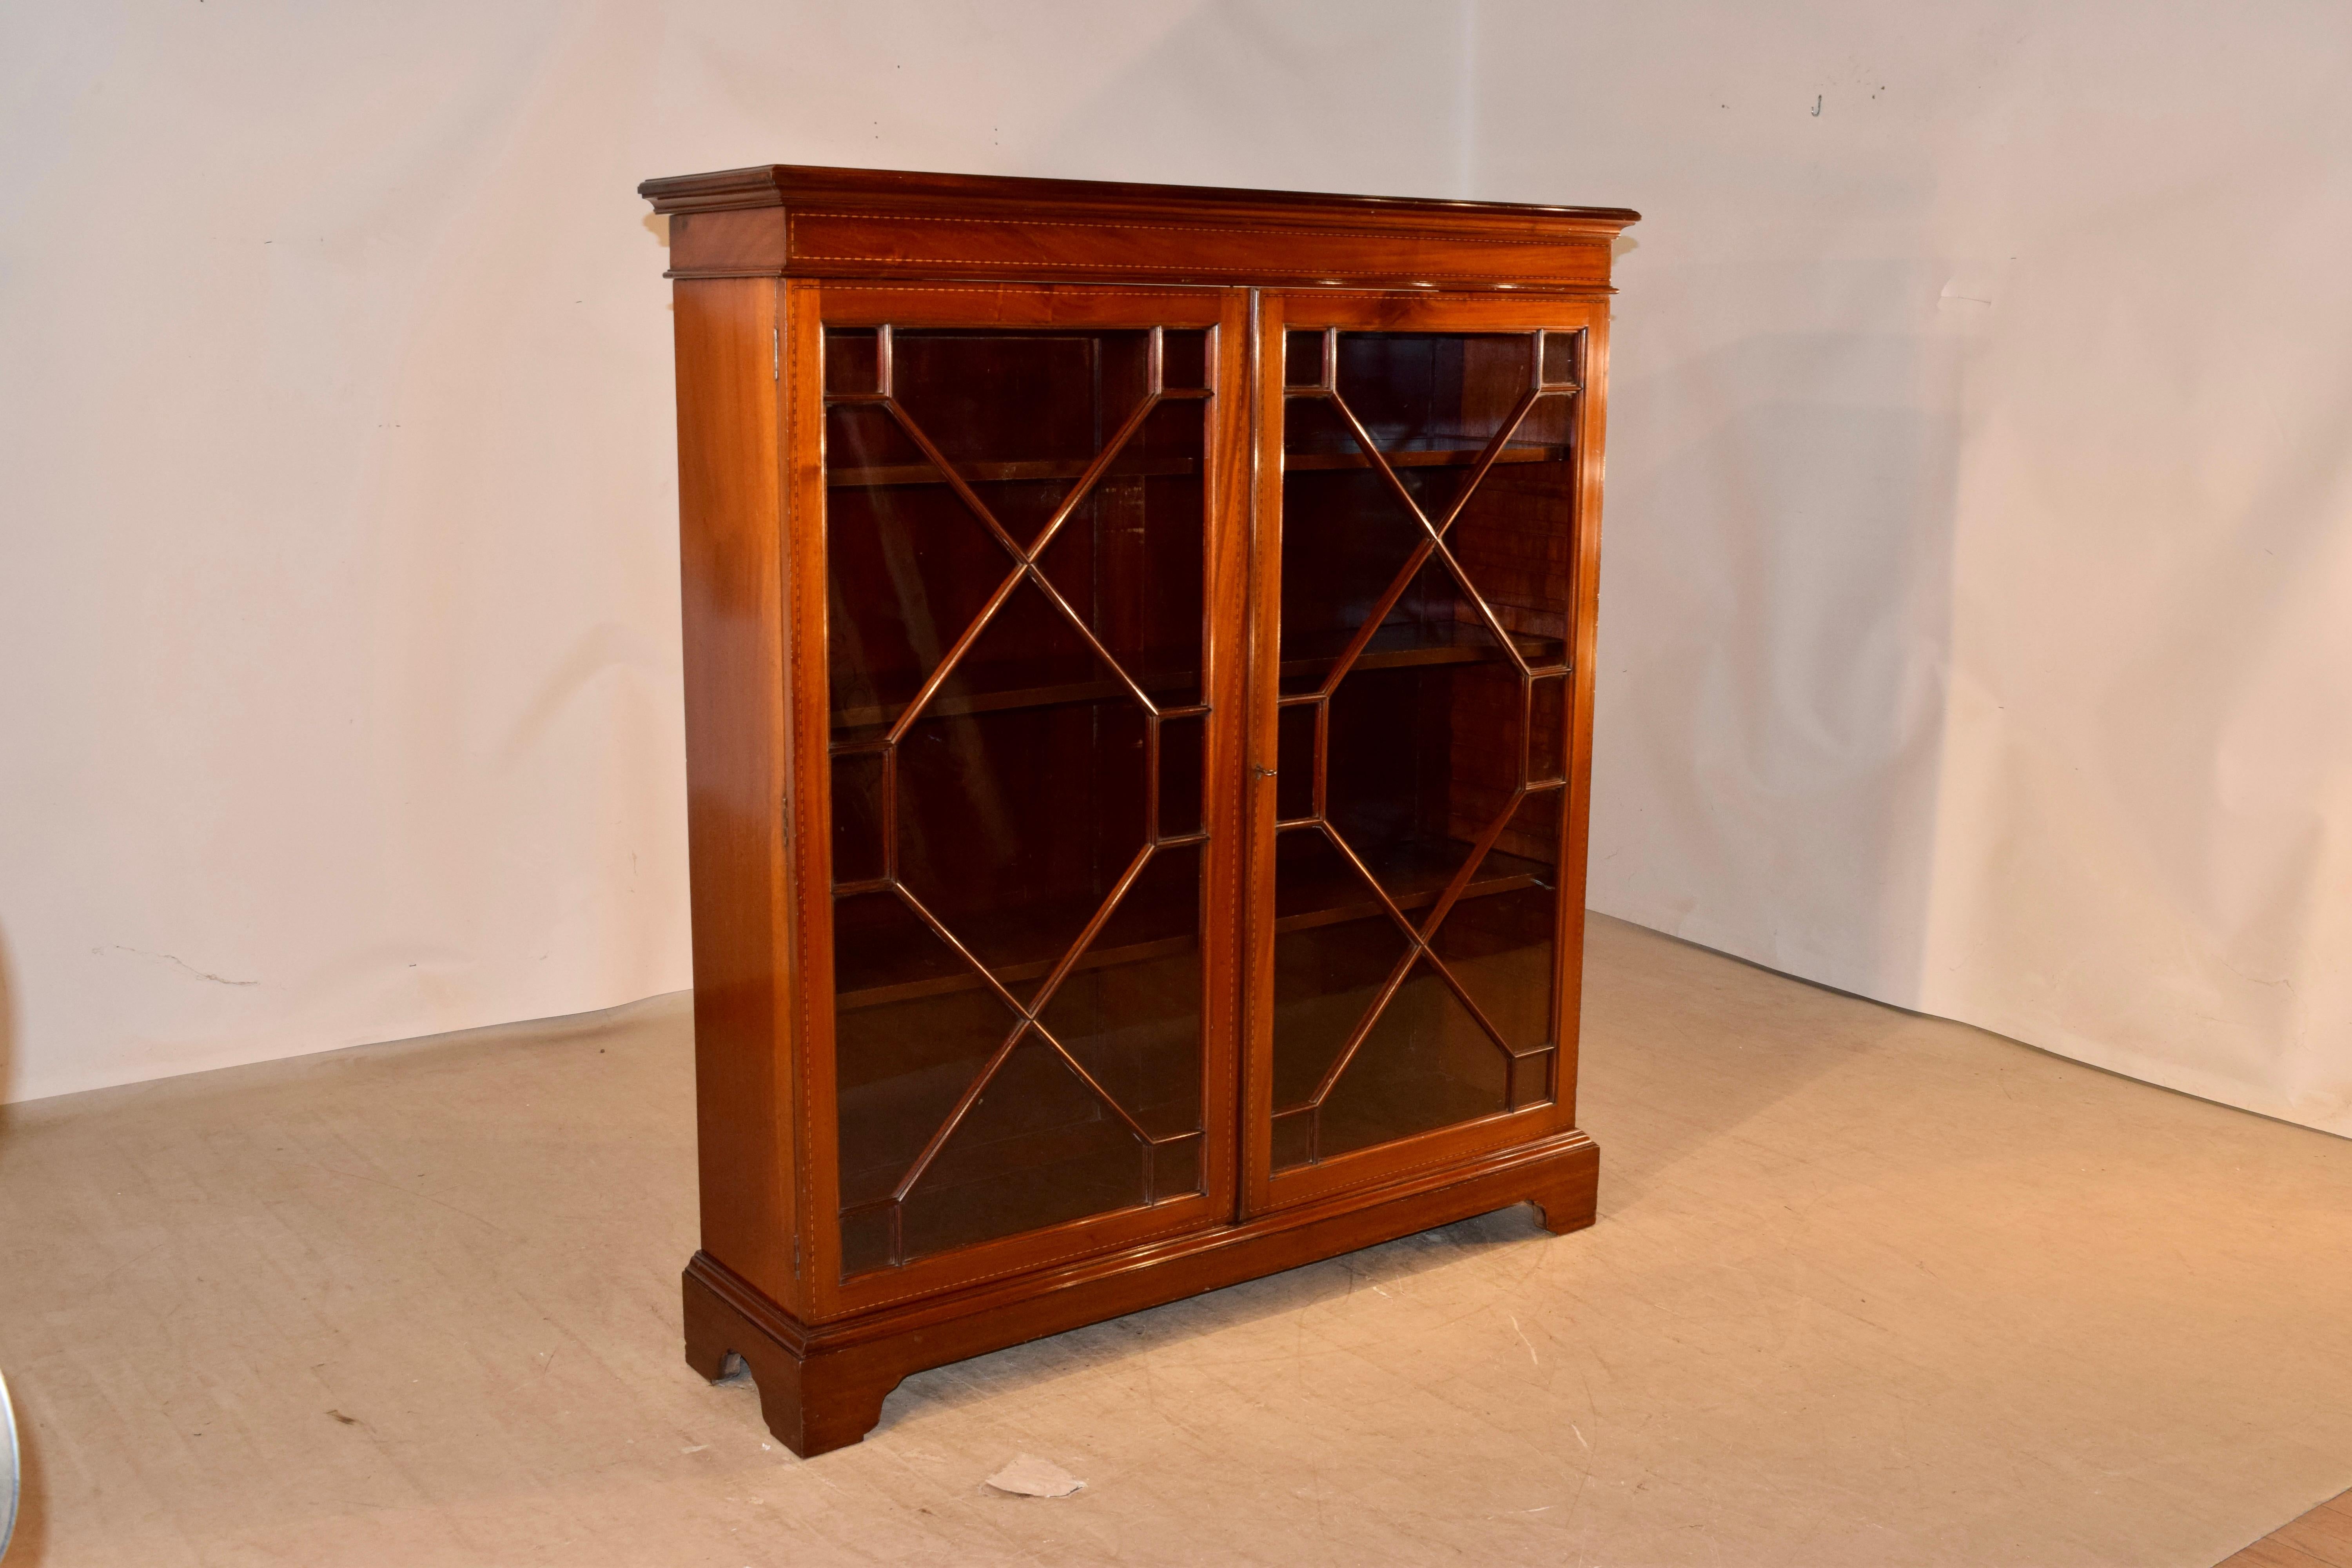 Edwardian mahogany bookcase with astragal glazed doors, circa 1920. The top has a beveled edge following down to cove molding and barber pole inlay on the front. The sides are simple mahogany and have wonderful color and patina. In the front of the